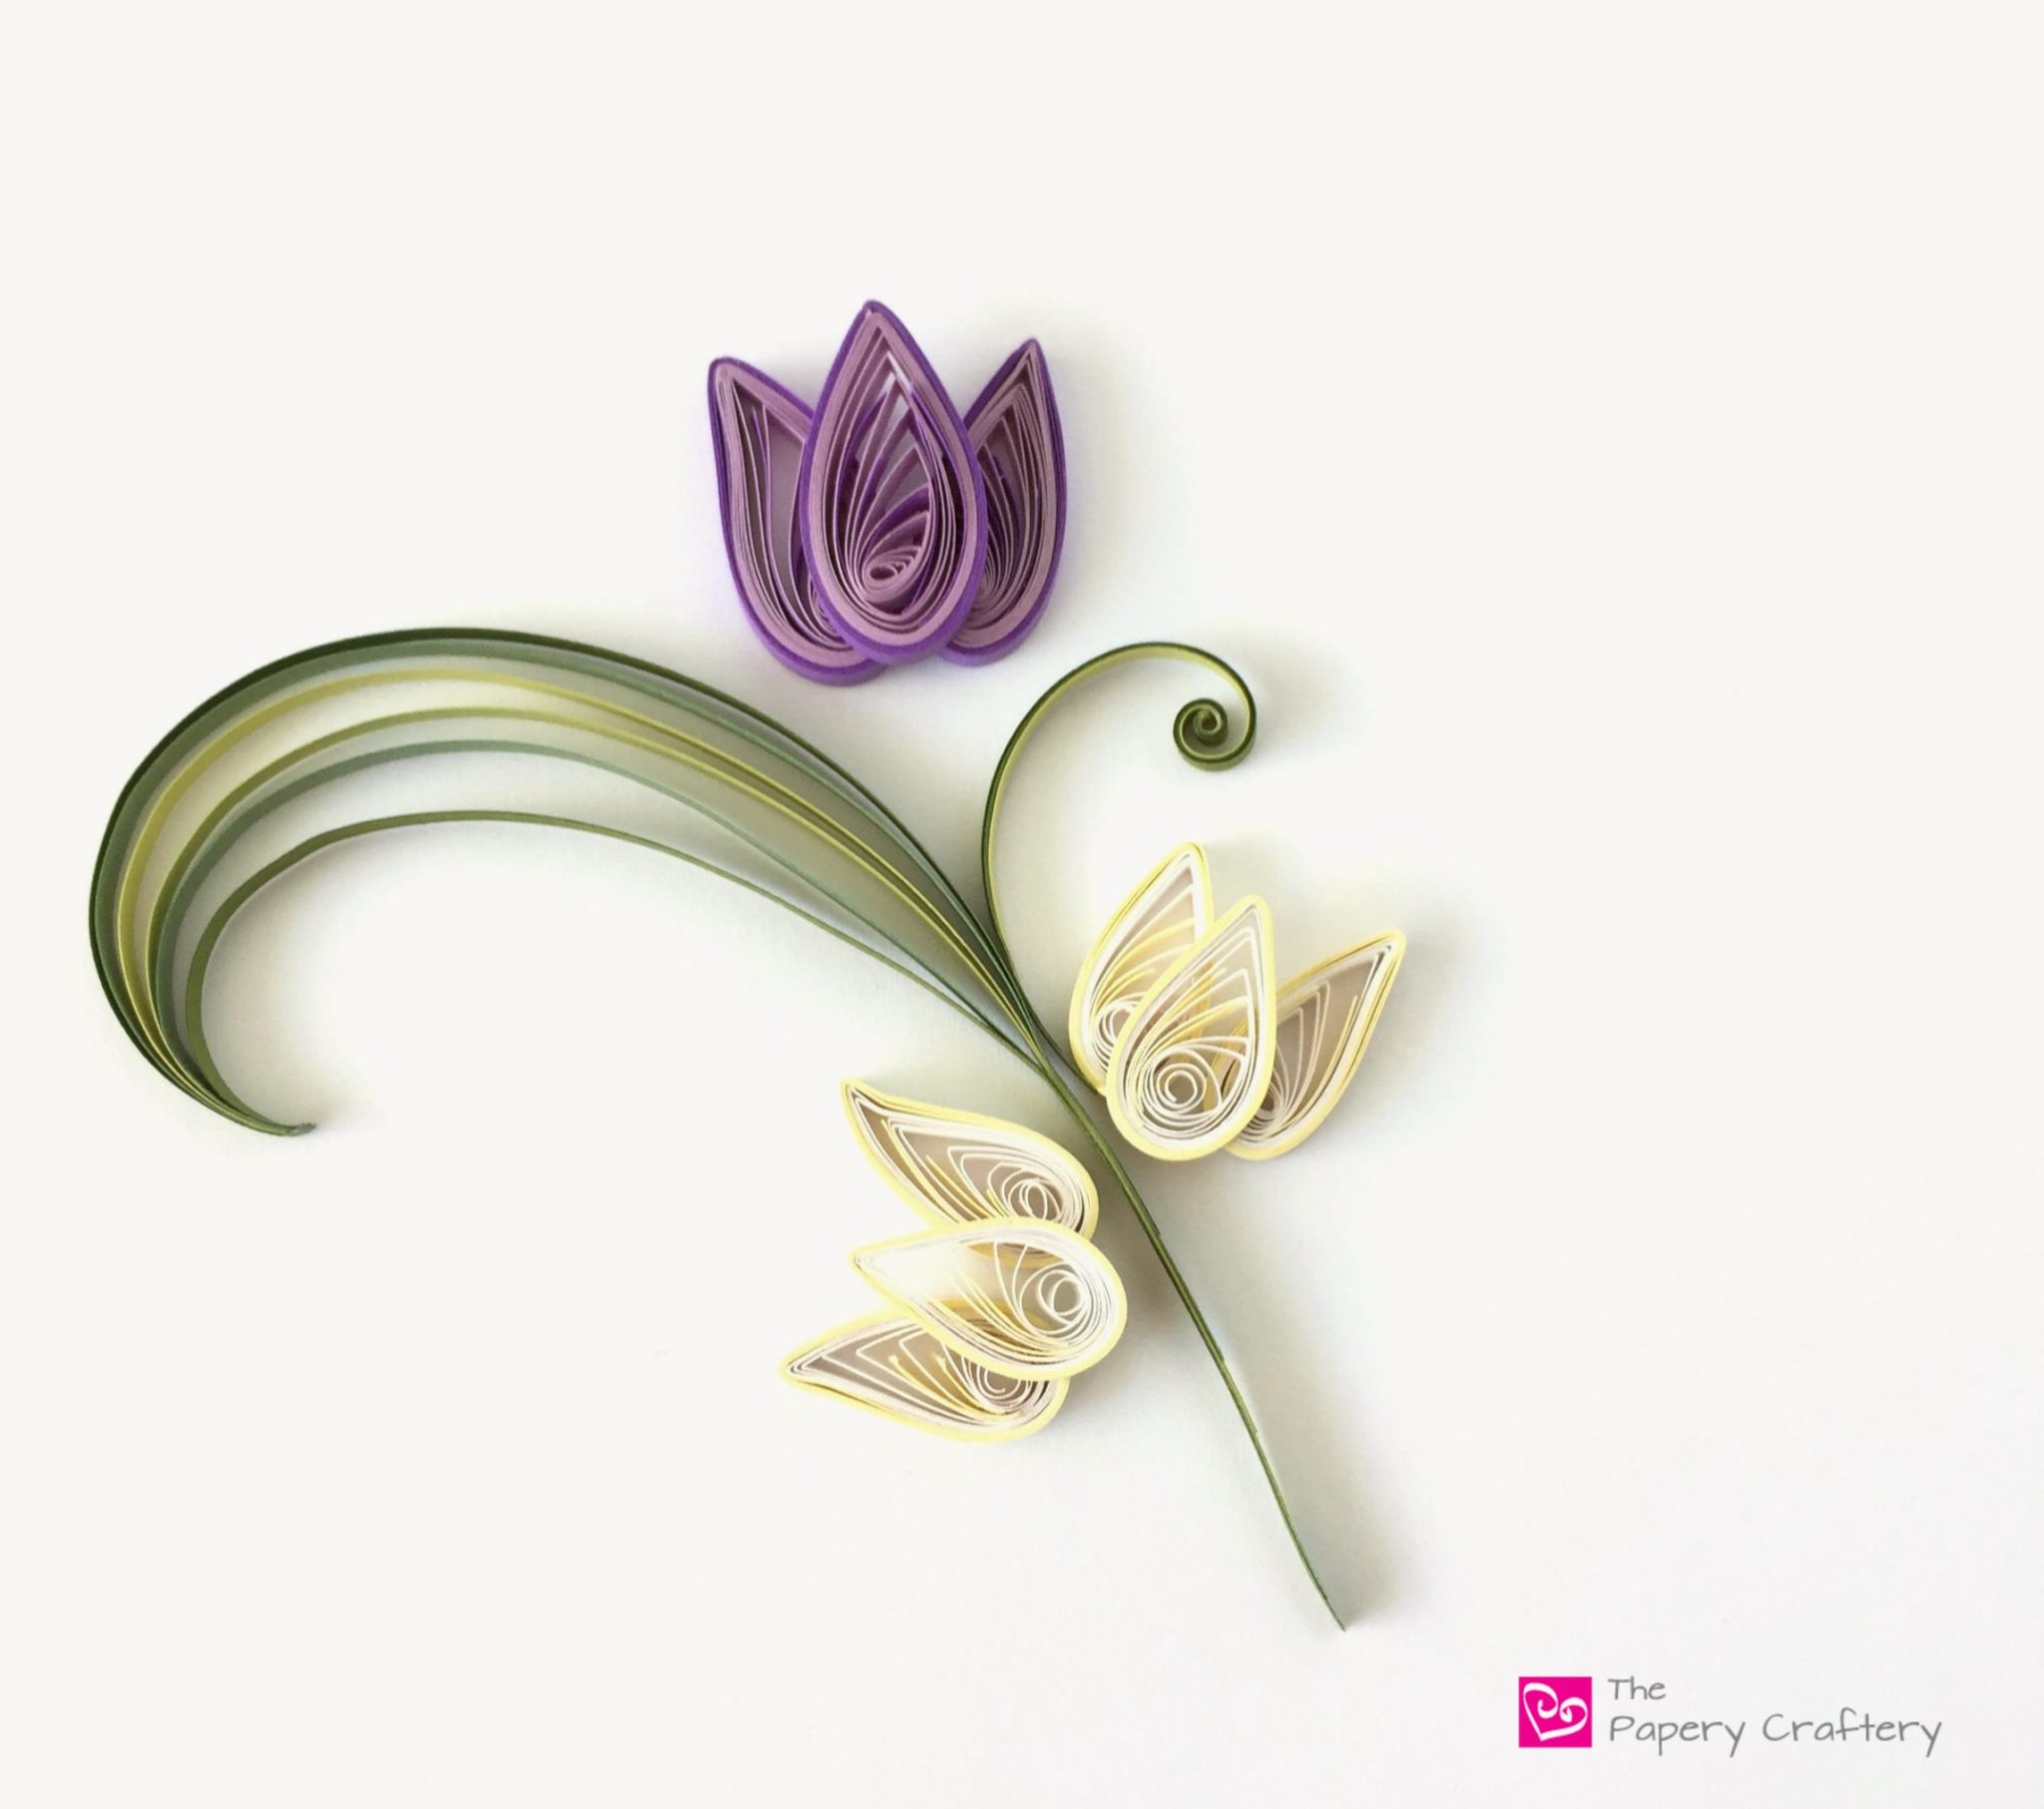 How to Frame Quilling Paper Art - The Papery Craftery